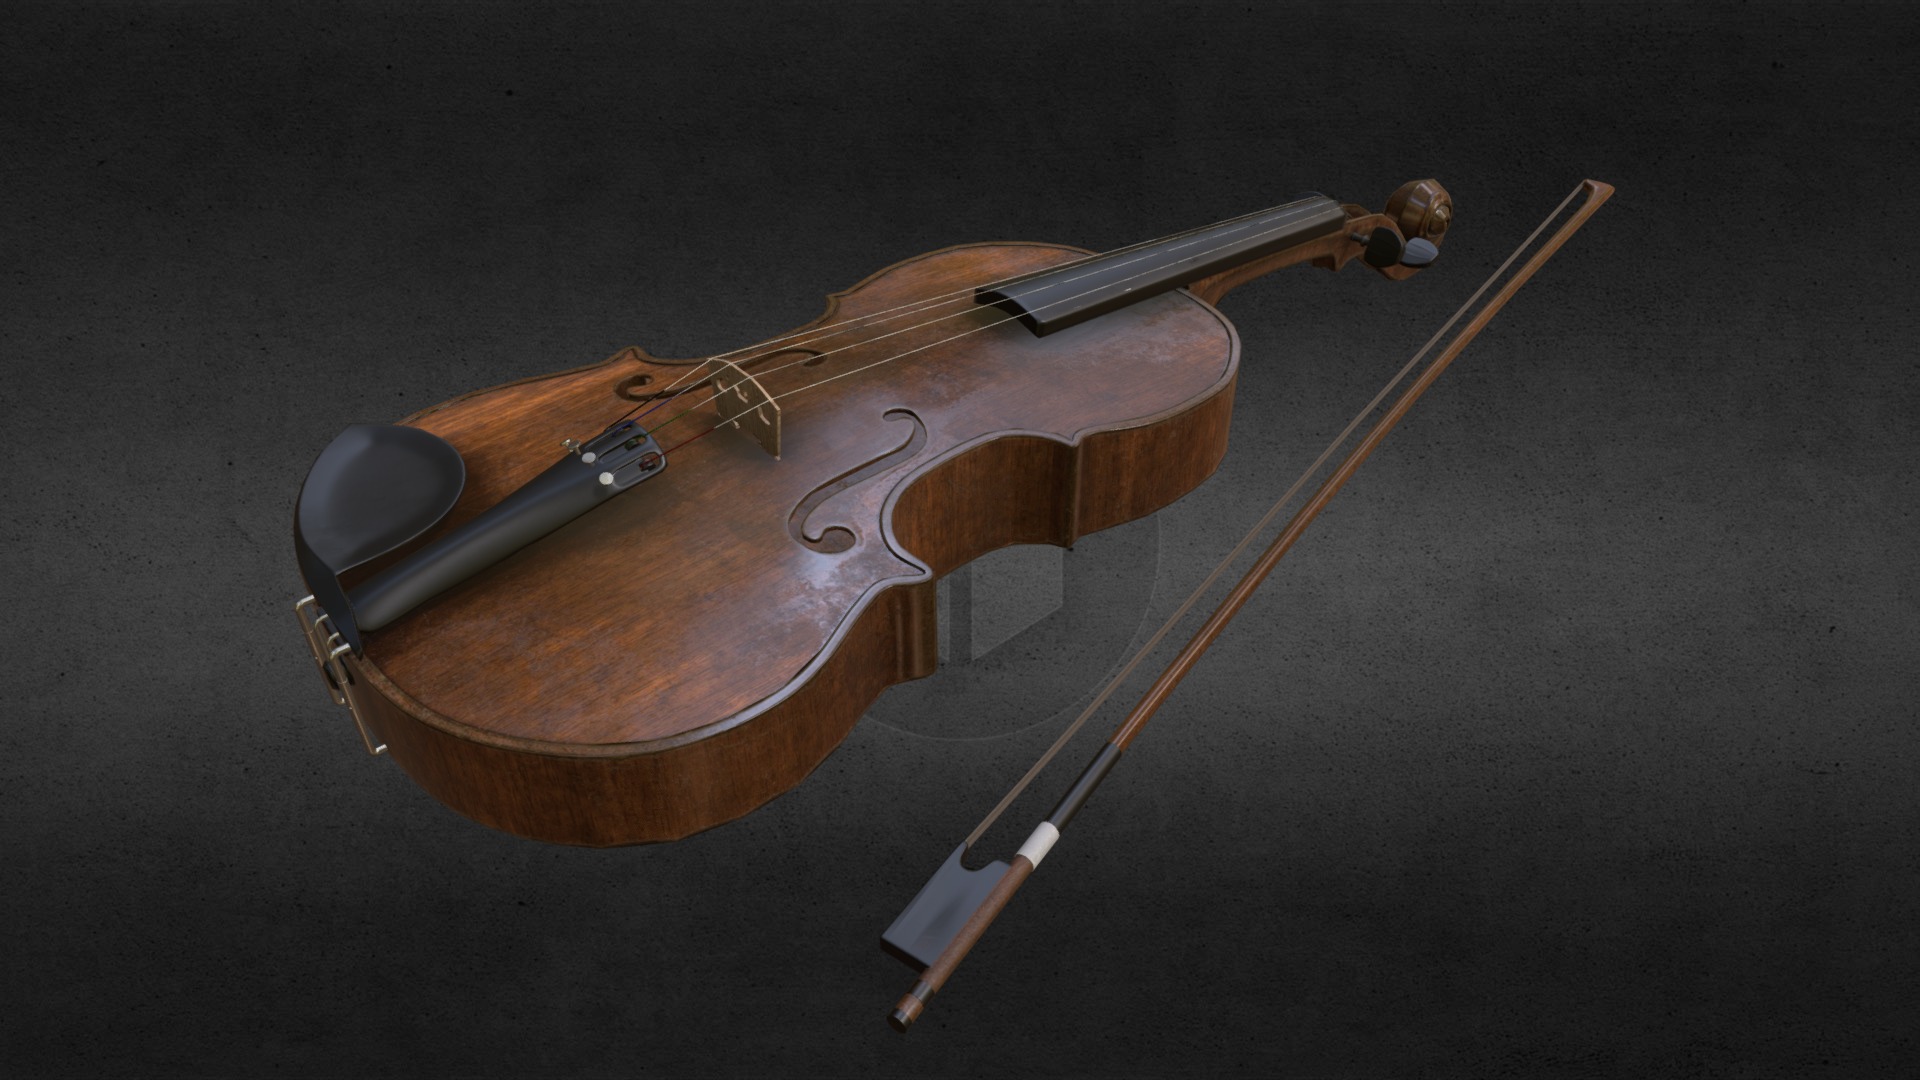 Violin
Modeled in 3ds max studio. Textured and baked in substance painter.
Material -2048x2048 - Violin - Download Free 3D model by RafalTlalka 3d model